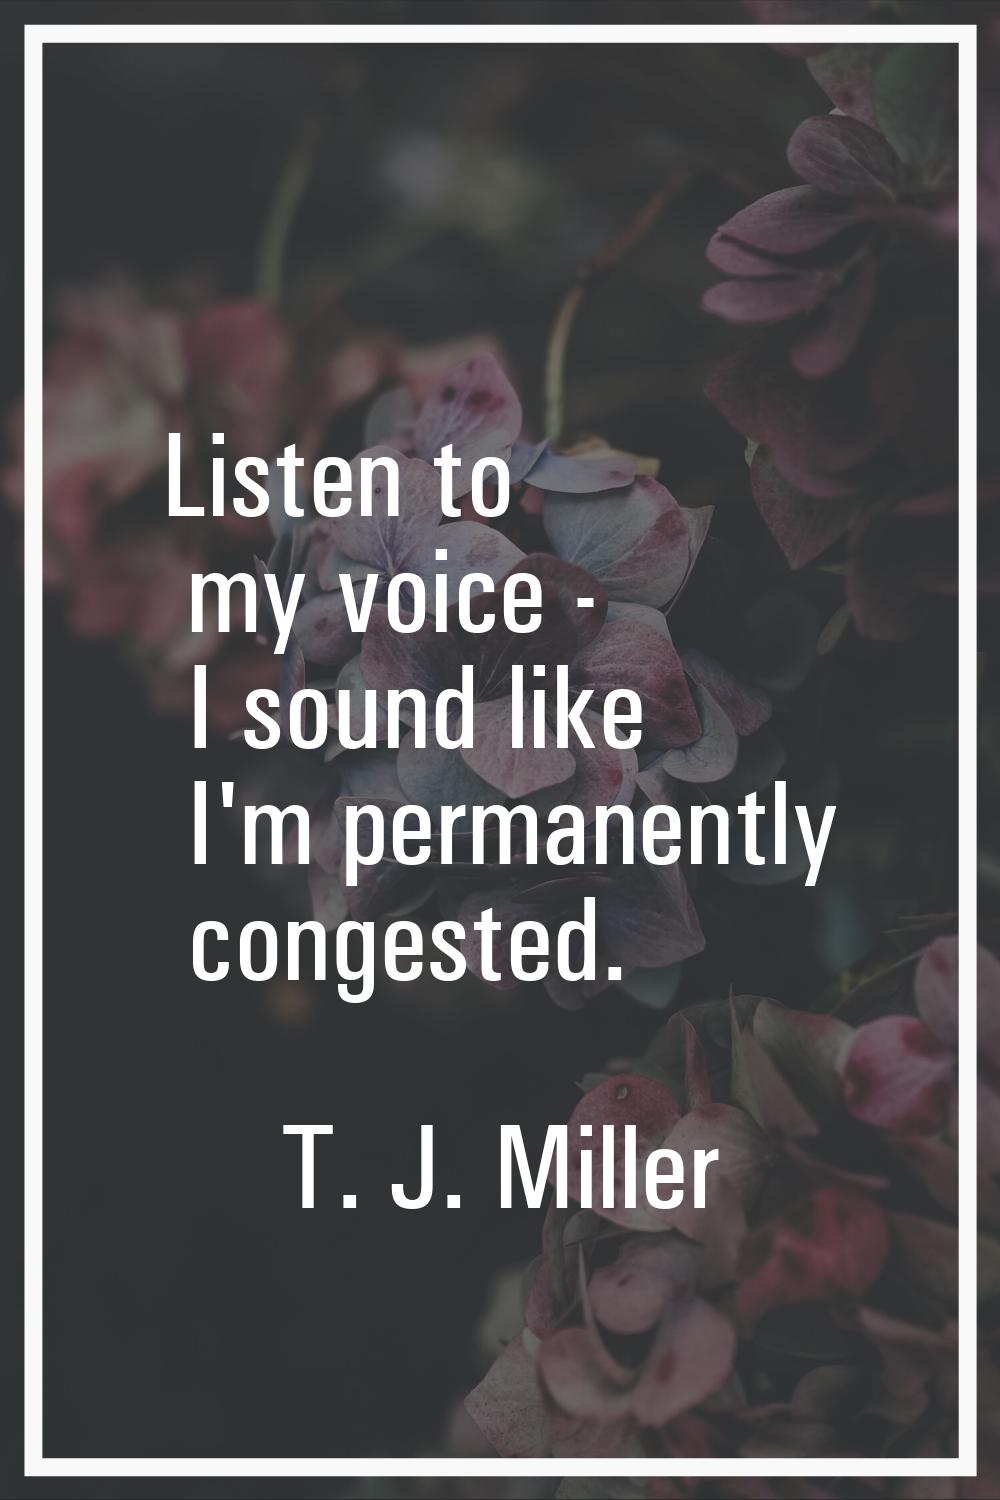 Listen to my voice - I sound like I'm permanently congested.